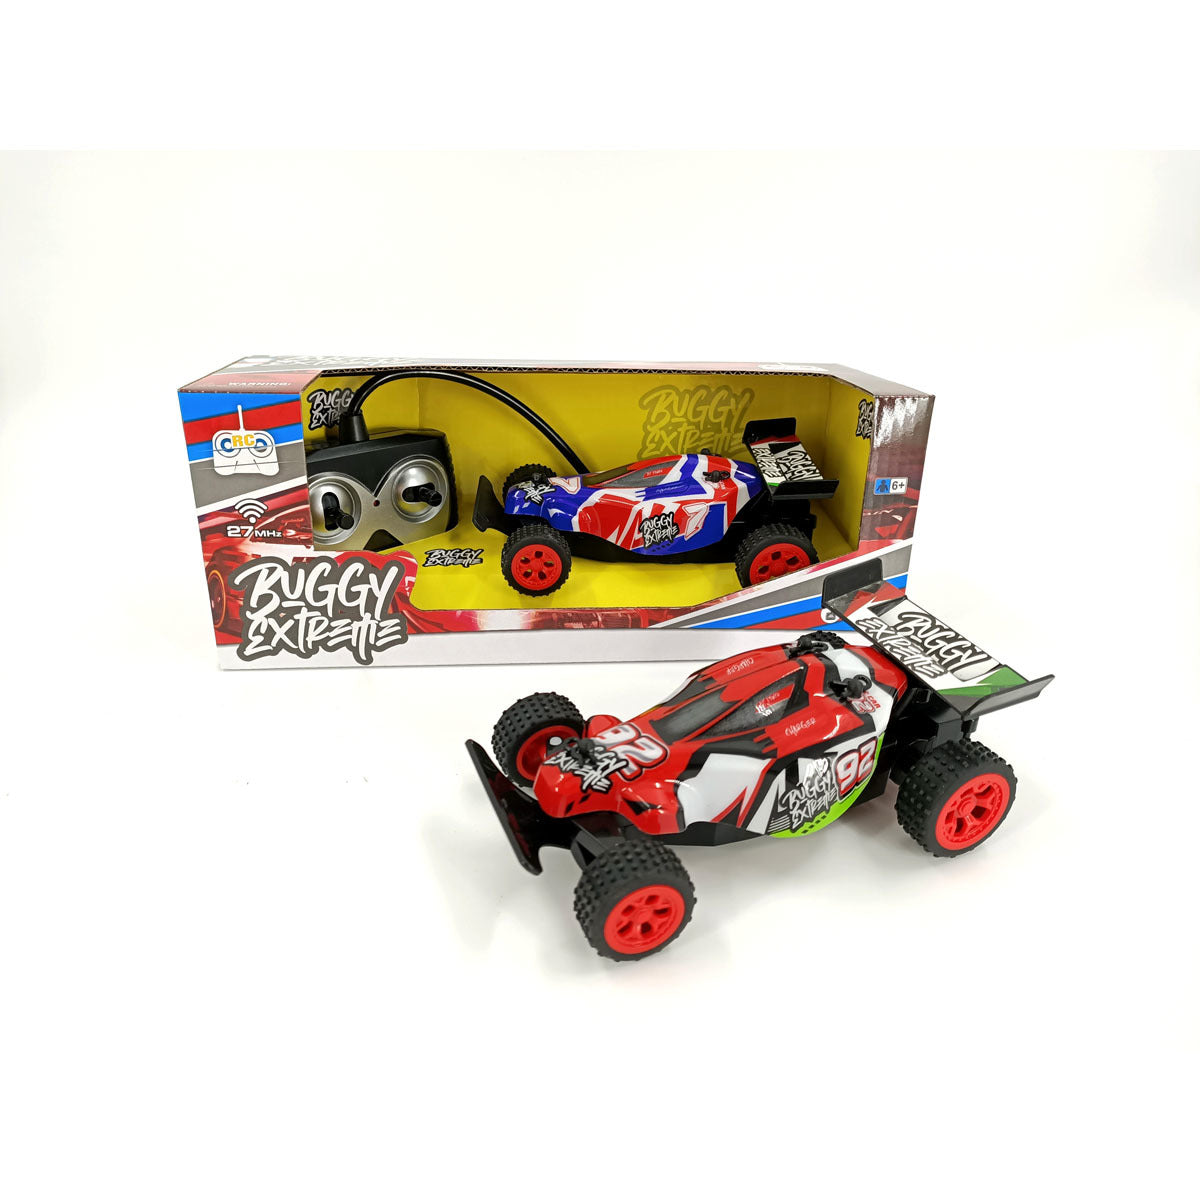 RC 1:28 Buggy Extreme - Red